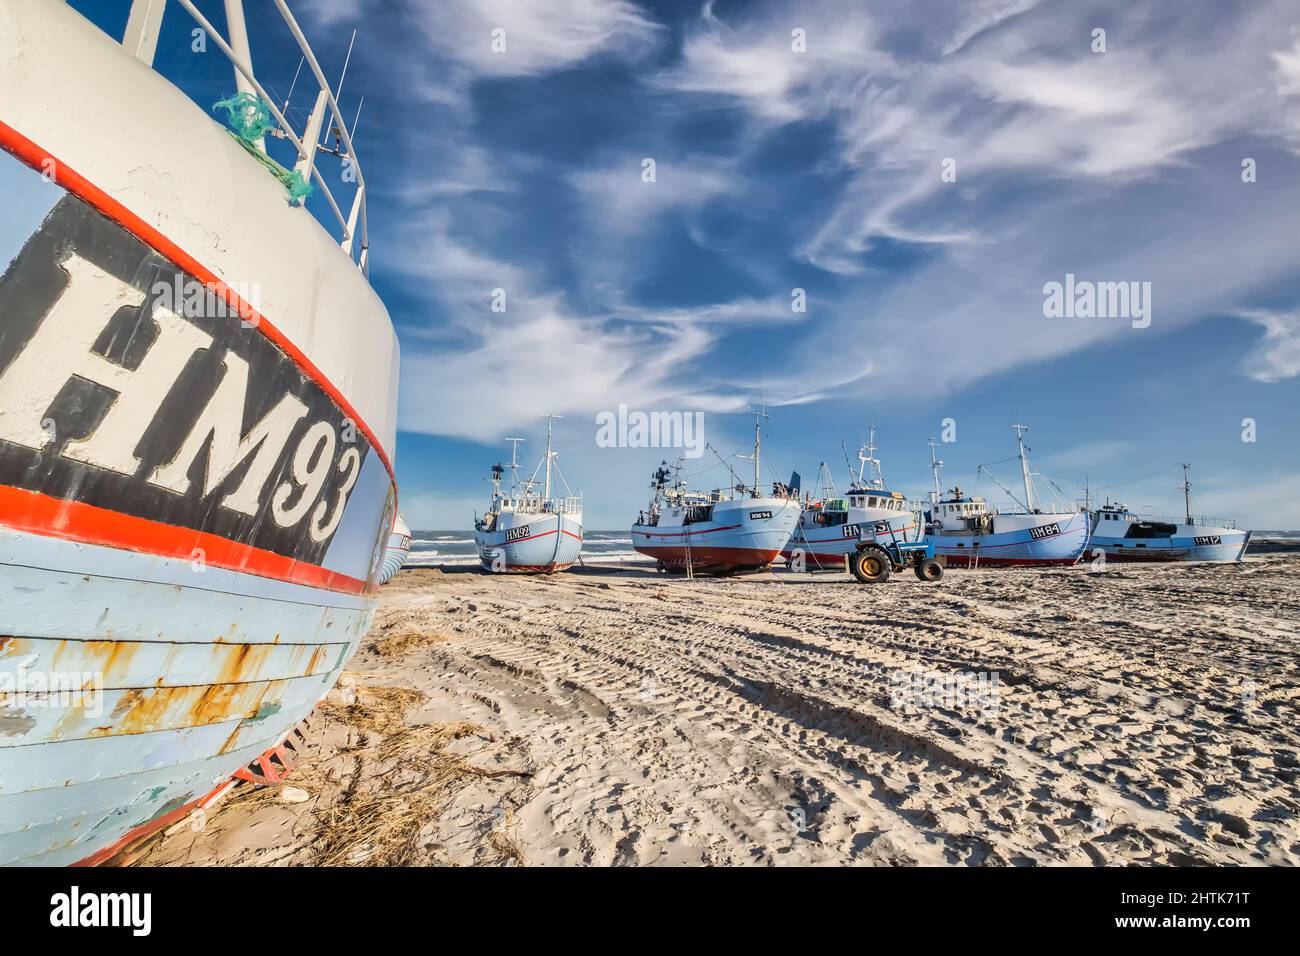 Thorup strand cutters fishing vessels for traditional fishery at the North Sea coast in Denmark Stock Photo